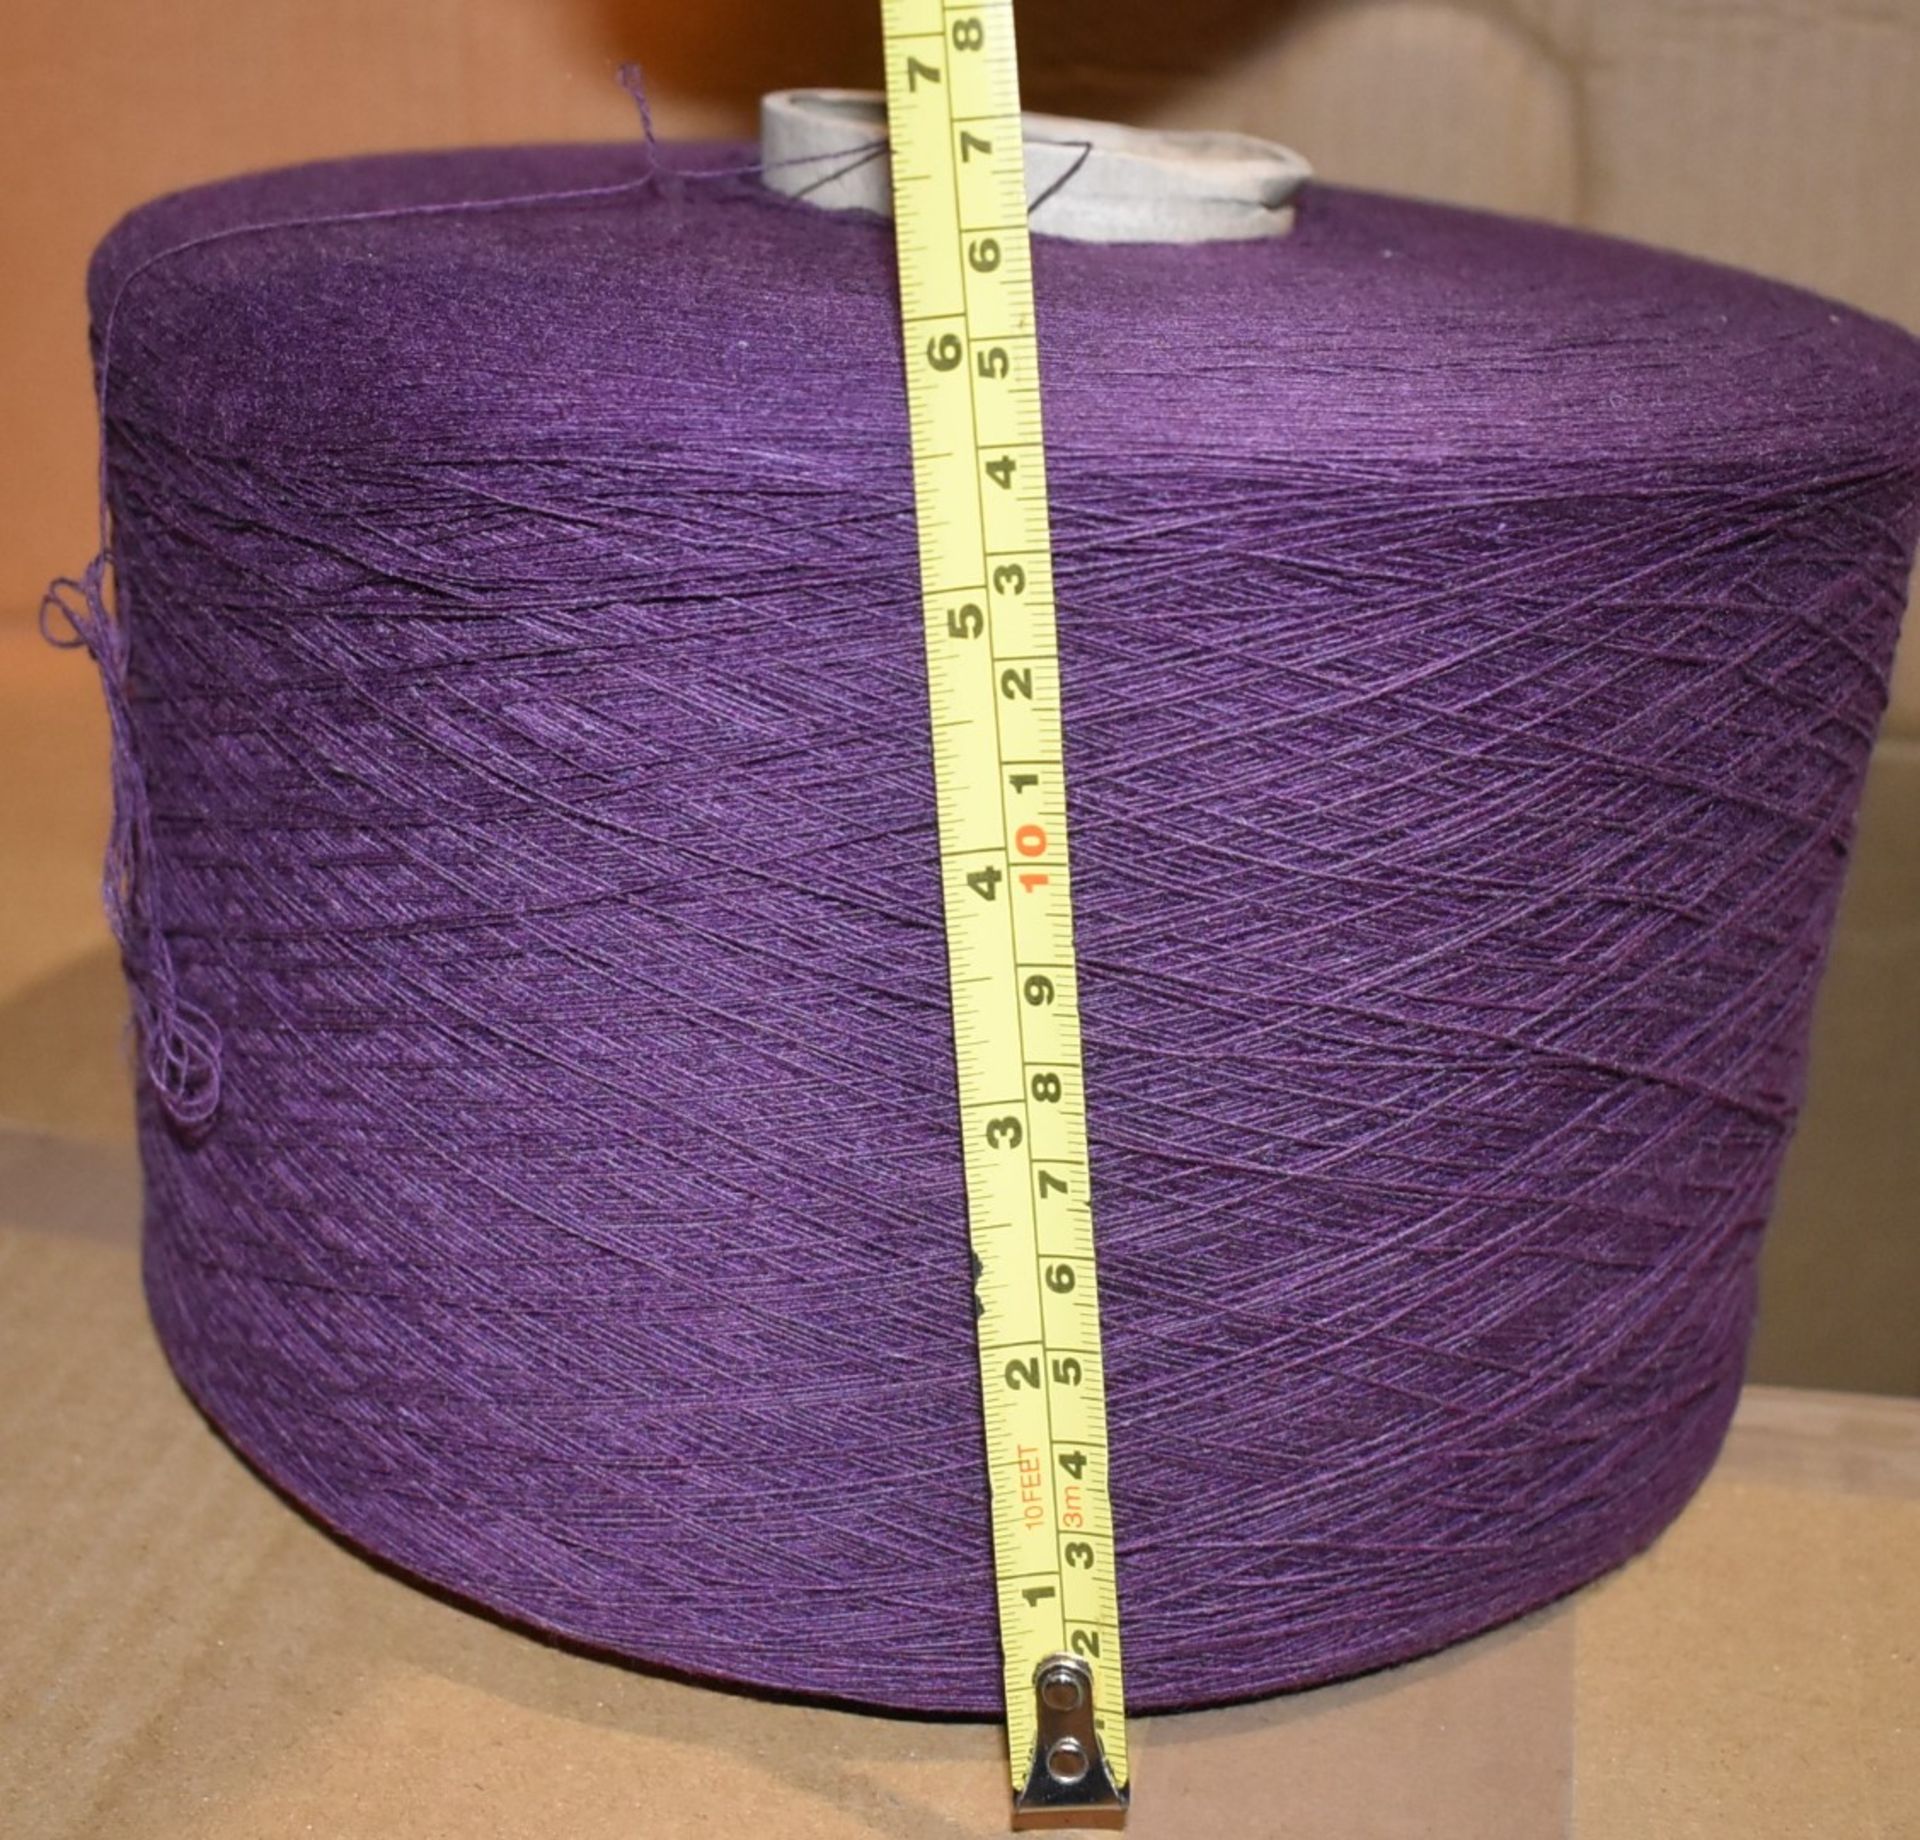 12 x Cones of 1/13 MicroCotton Knitting Yarn - Purple - Approx Weight: 2,300g - New Stock ABL Yarn - Image 14 of 15